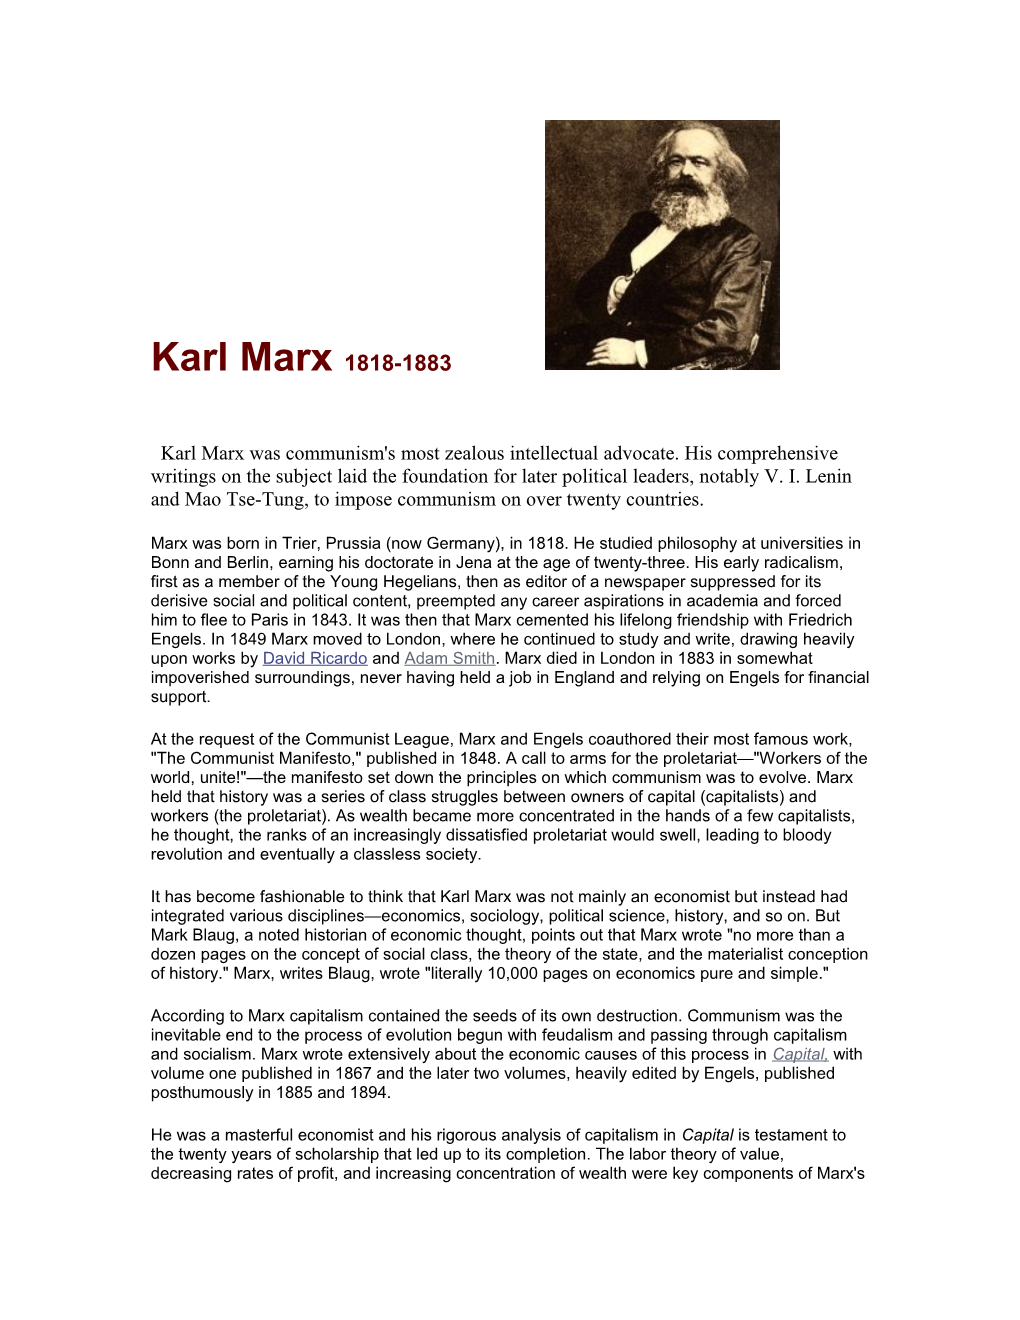 Karl Marx Was Communism's Most Zealous Intellectual Advocate. His Comprehensive Writings